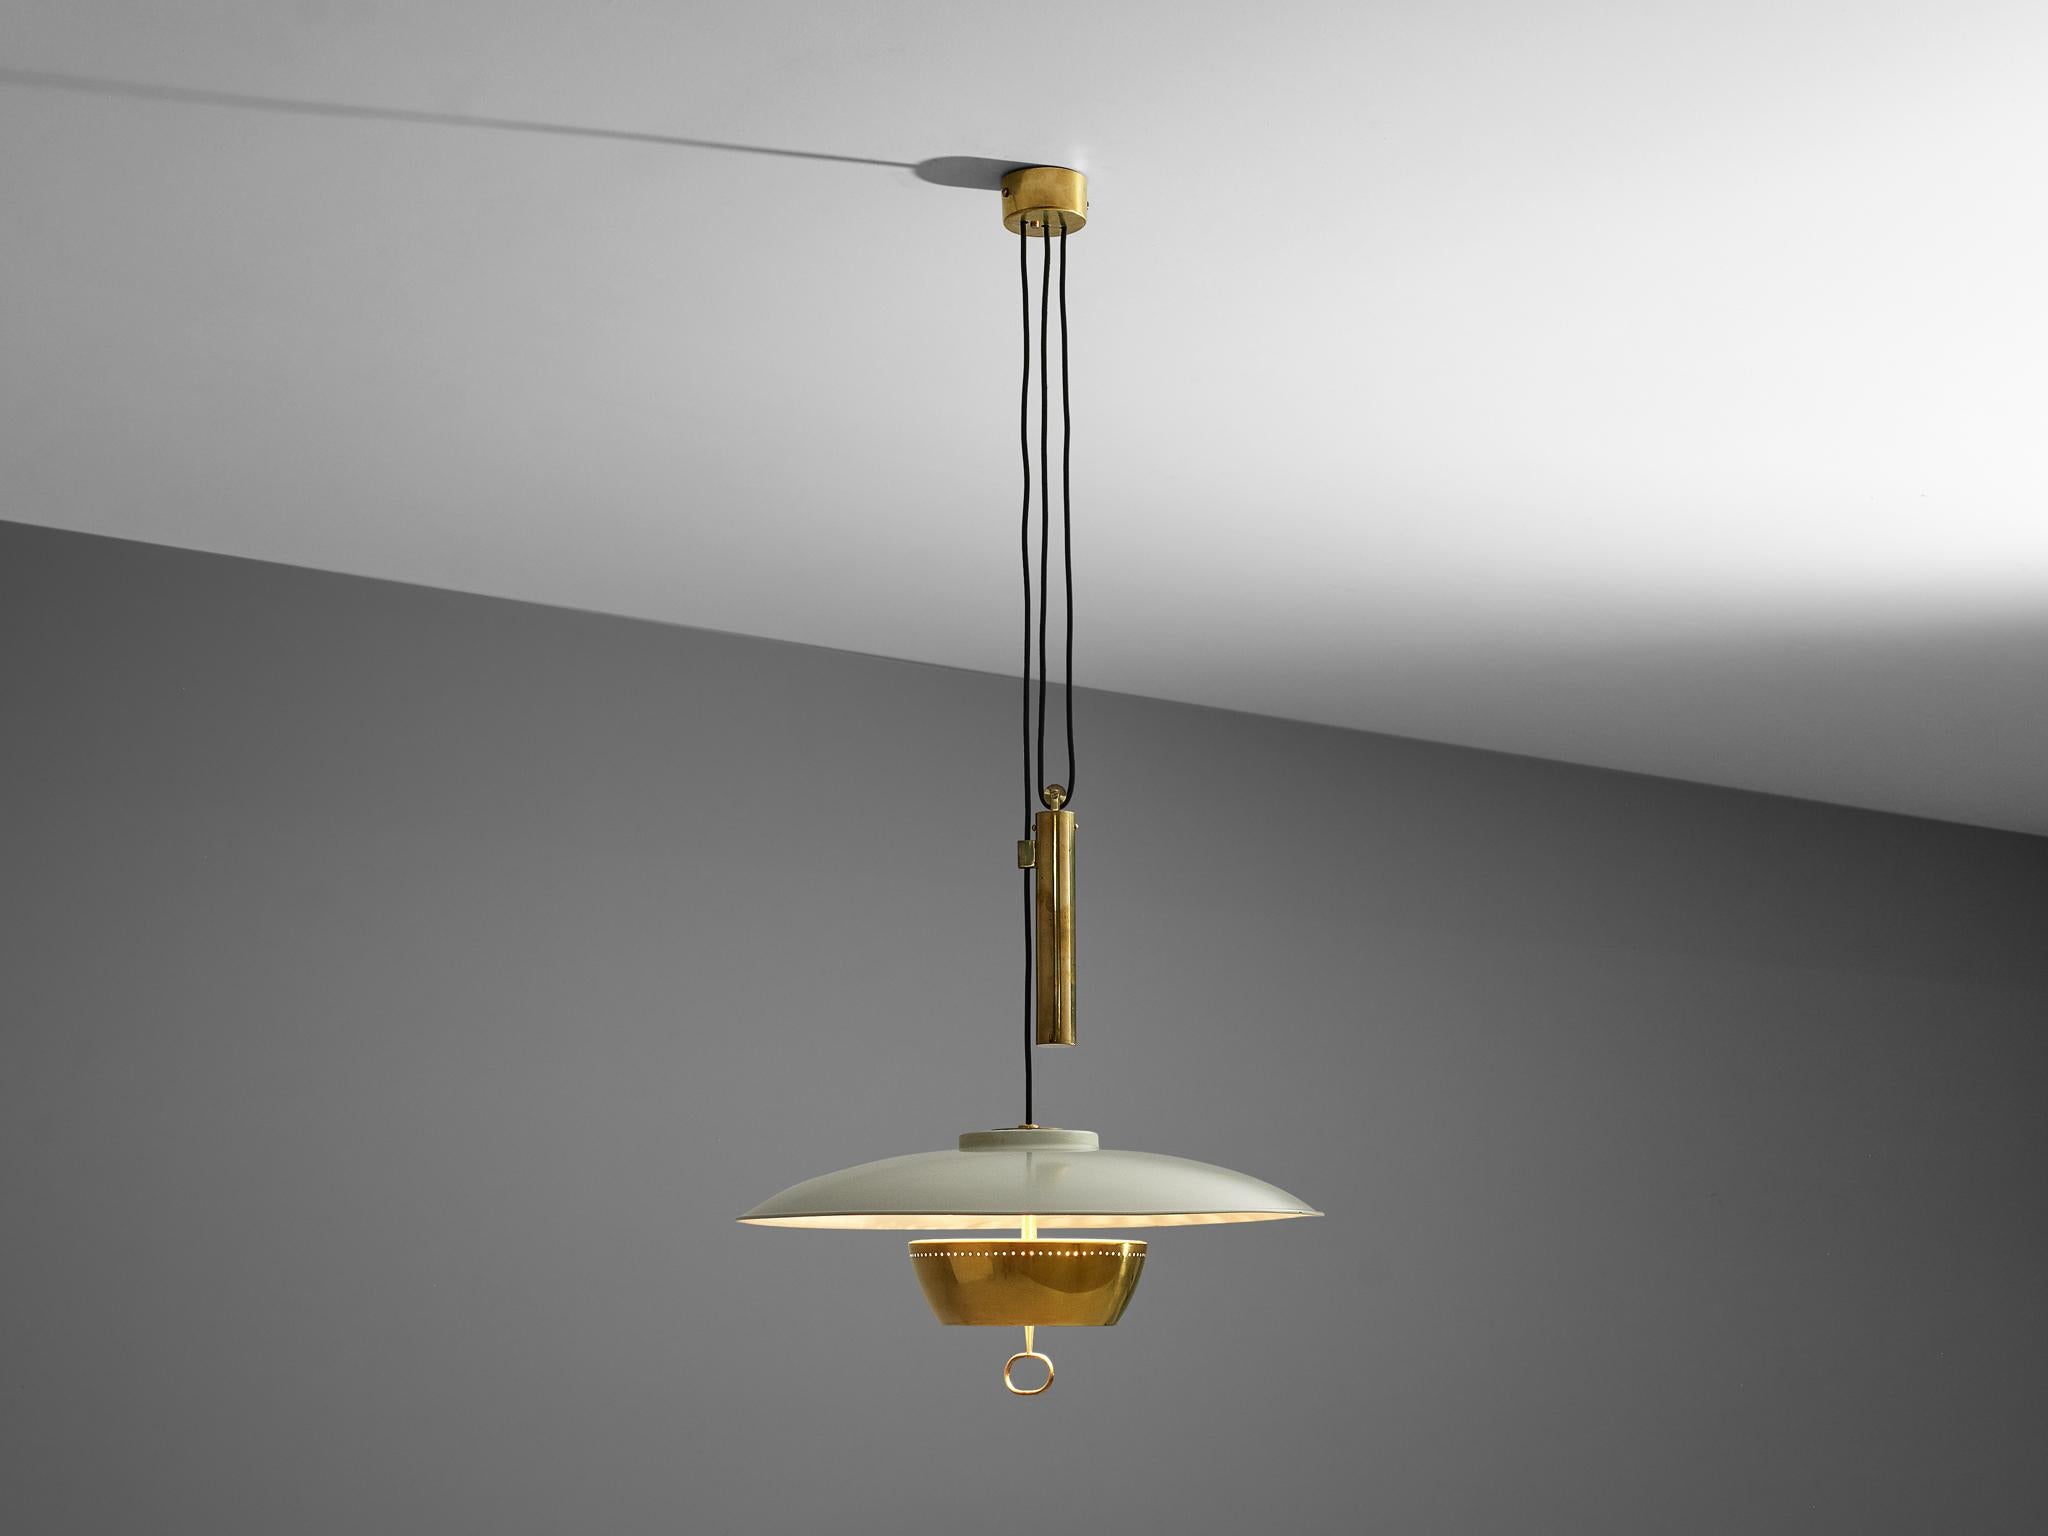 Gaetano Scolari for Stilnovo, ceiling light model A5011, metal, brass, Italy, 1950

Elegant, dynamic and modern pendant by Sciolari for Stilnovo. Adjustable in height due the counterweight. The light gets beautifully reflected by the white inside